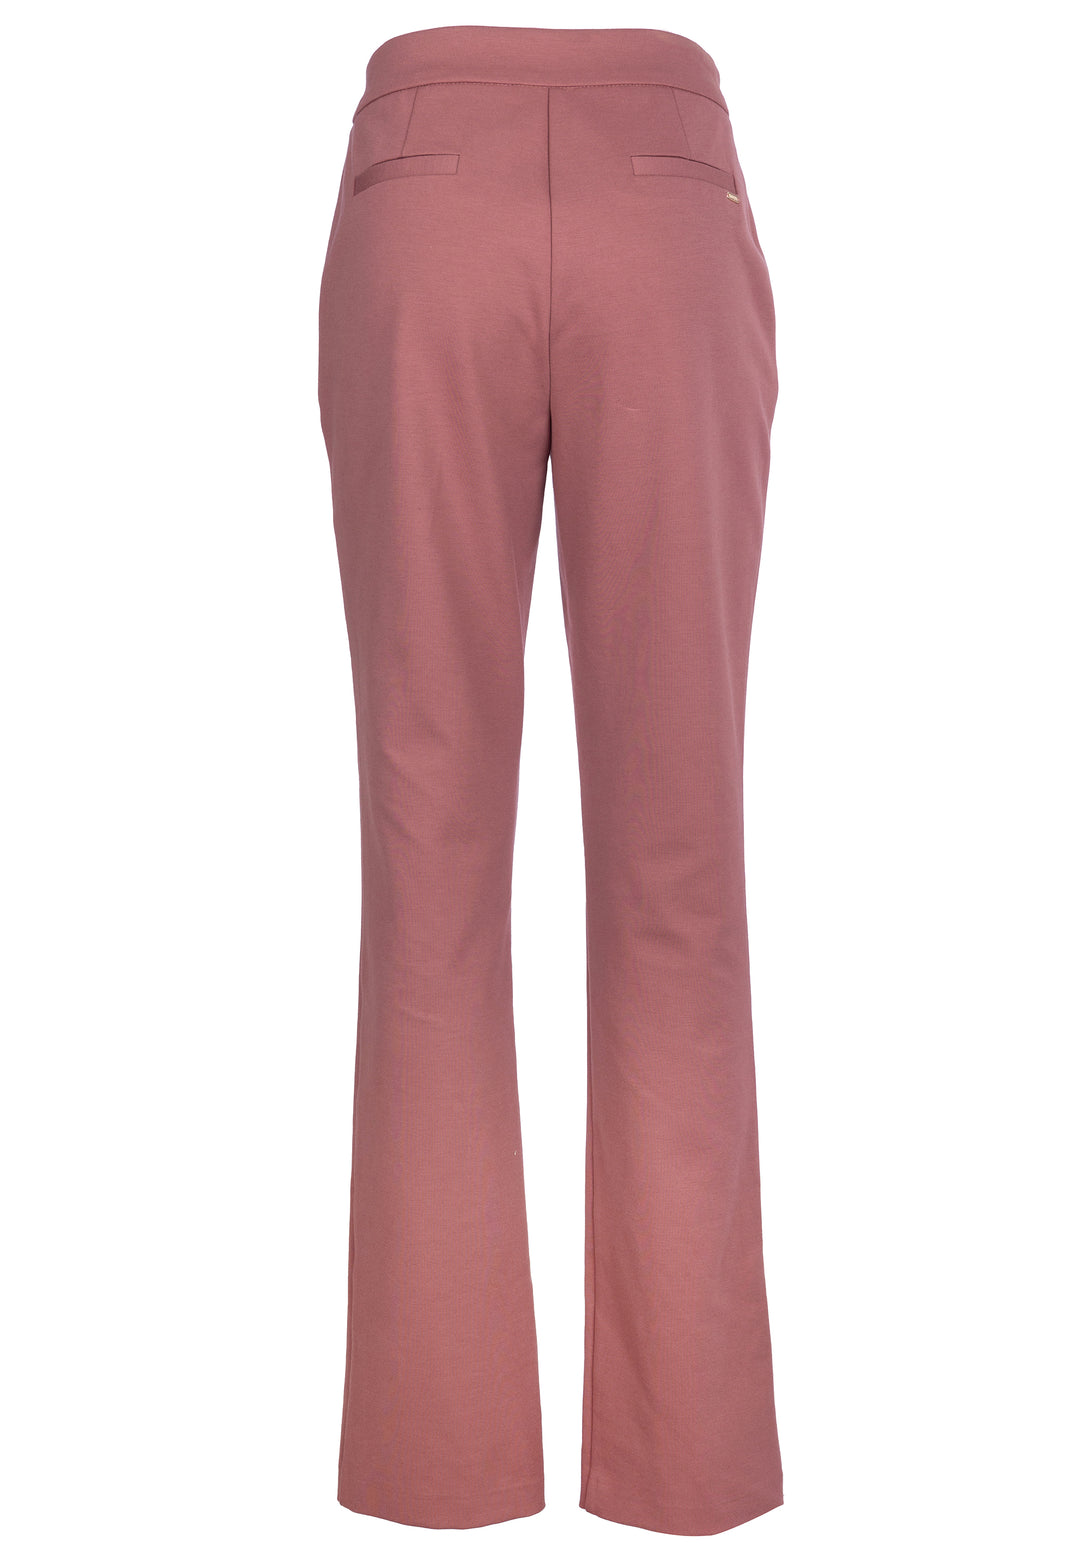 Palazzo pant wide fit made in Milano stitch fabric